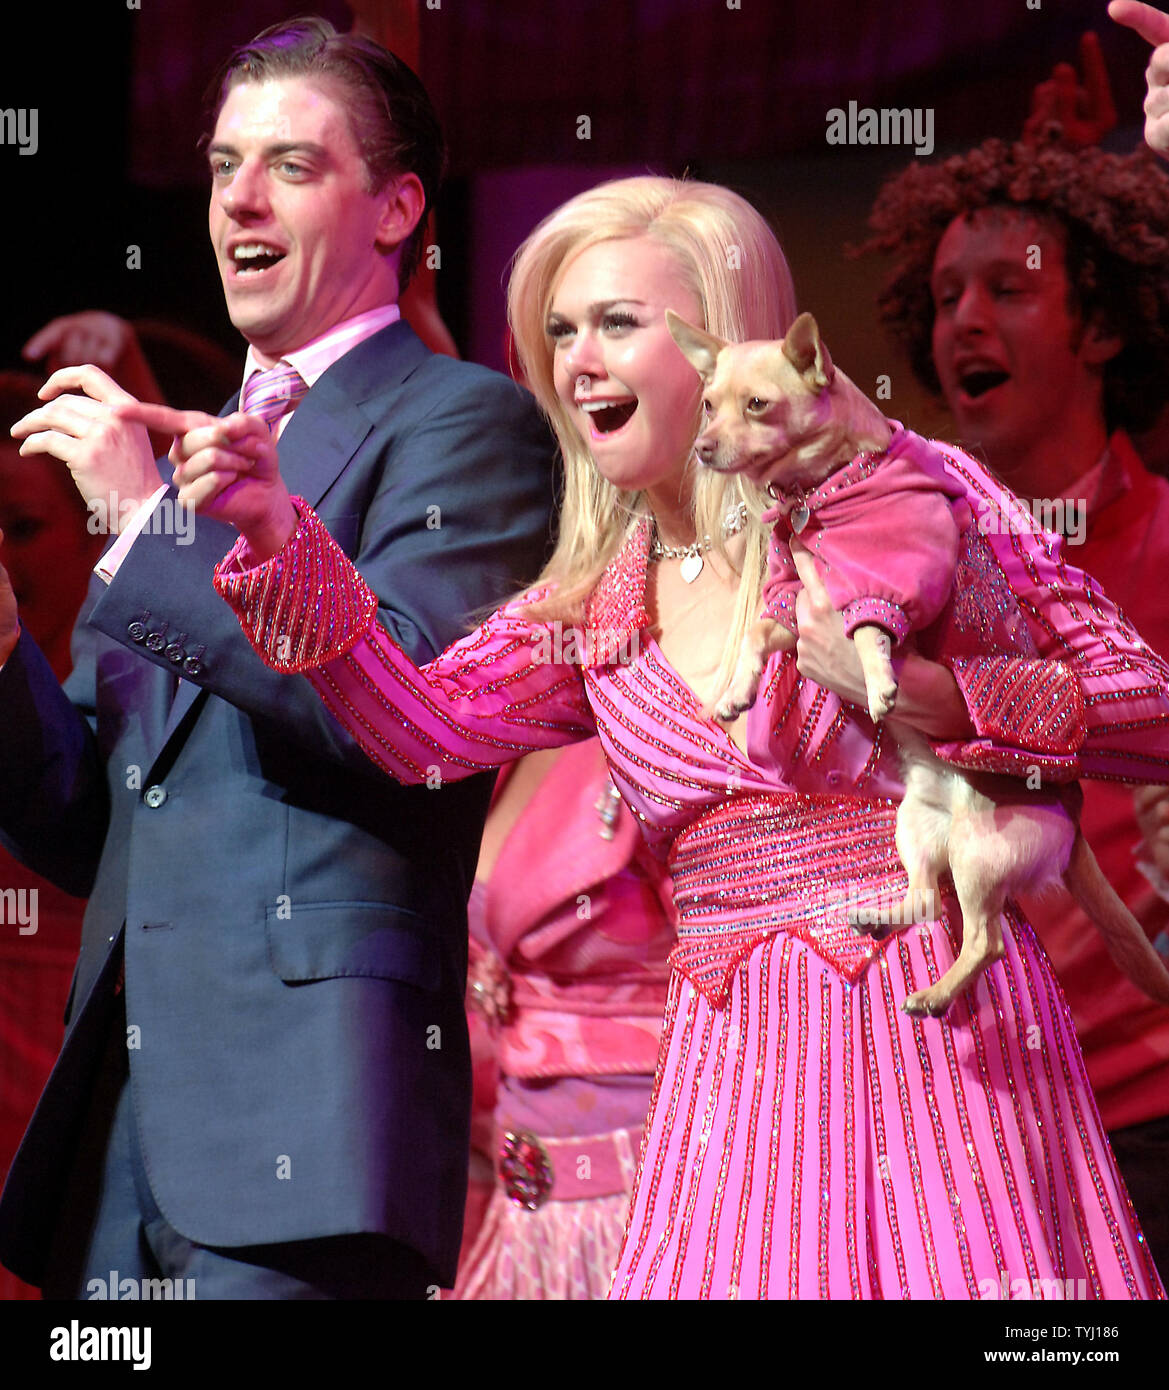 Actors Christian Borle and Laura Bell Bundy takes their opening night curtain call bows at New York's Palace theatre in the Broadway musical 'Legally Blonde' on April 29, 2007. The musical is based on the MGM film.  (UPI Photo/Ezio Petersen) Stock Photo